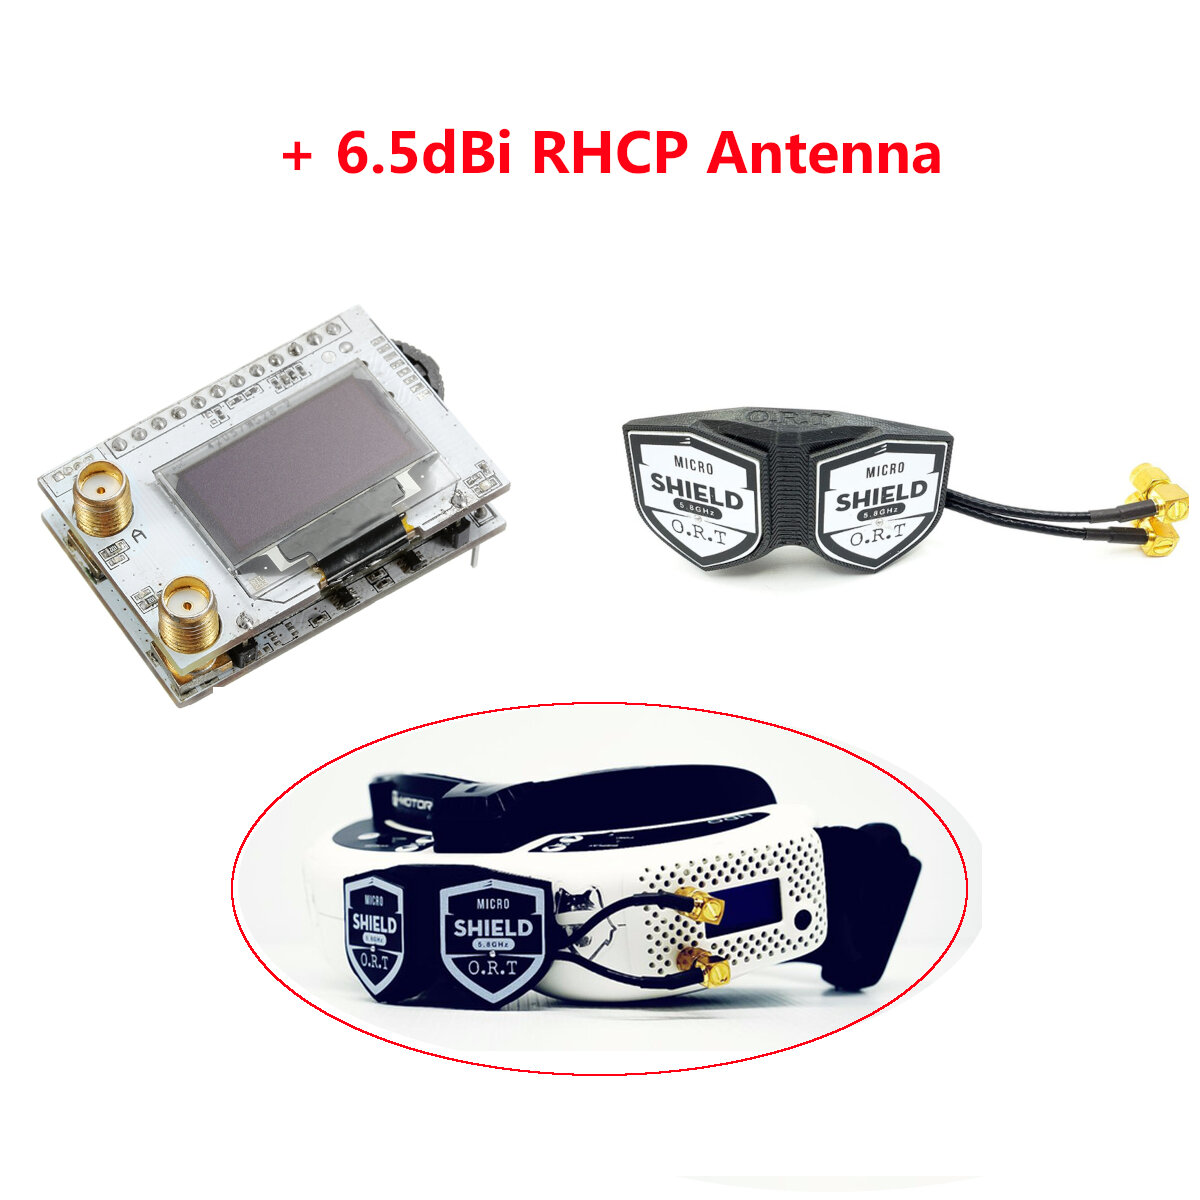 

Eachine PRO58 RX Diversity 40CH 5.8G OLED SCAN VRX FPV Receiver SMA with ORT DUAL SHIELD PRO 6.5dBi RHCP Antenna for Fat